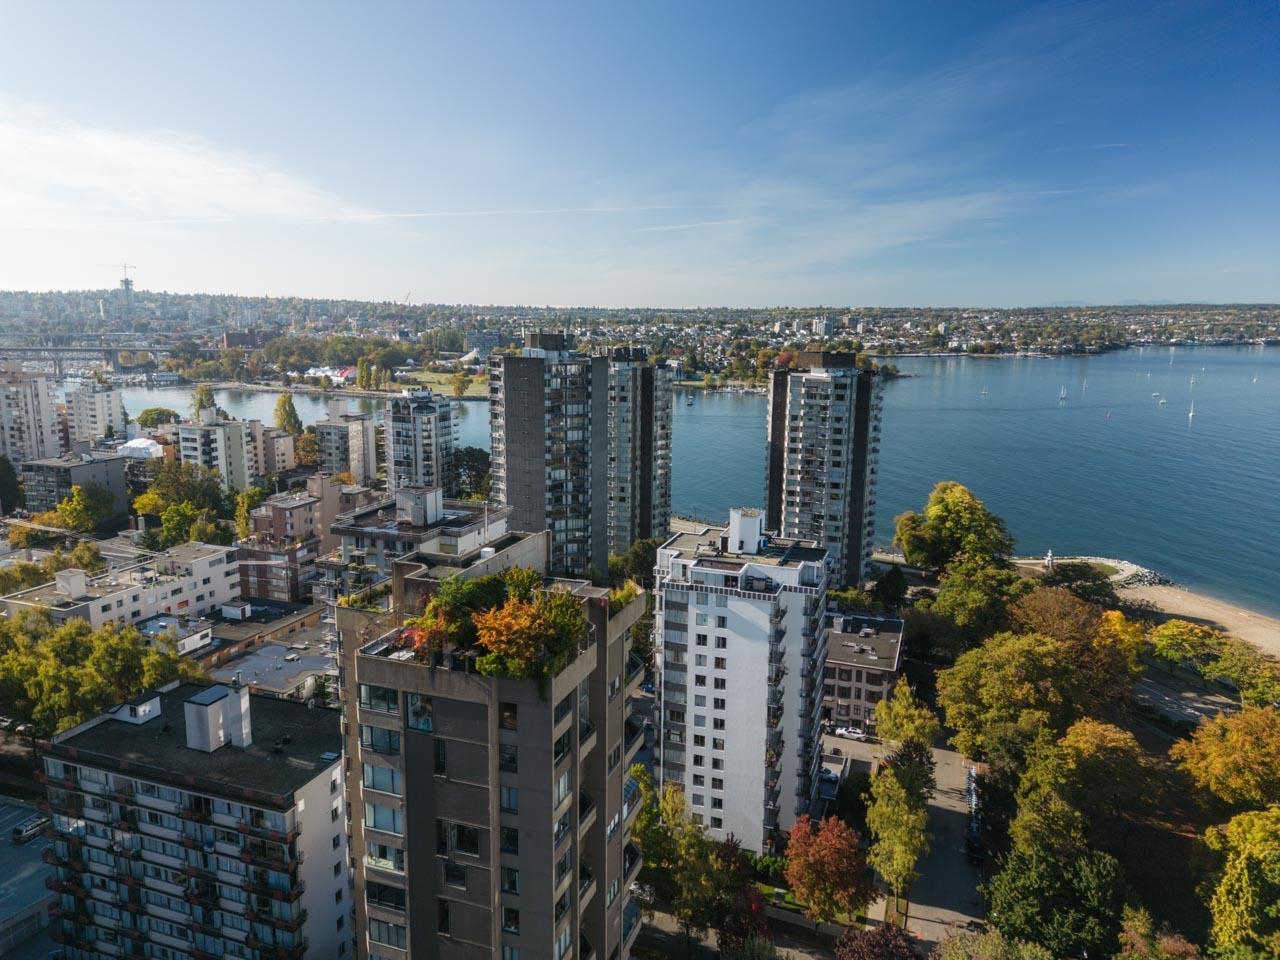 Showing Roof Terrace and Proximity to English Bay